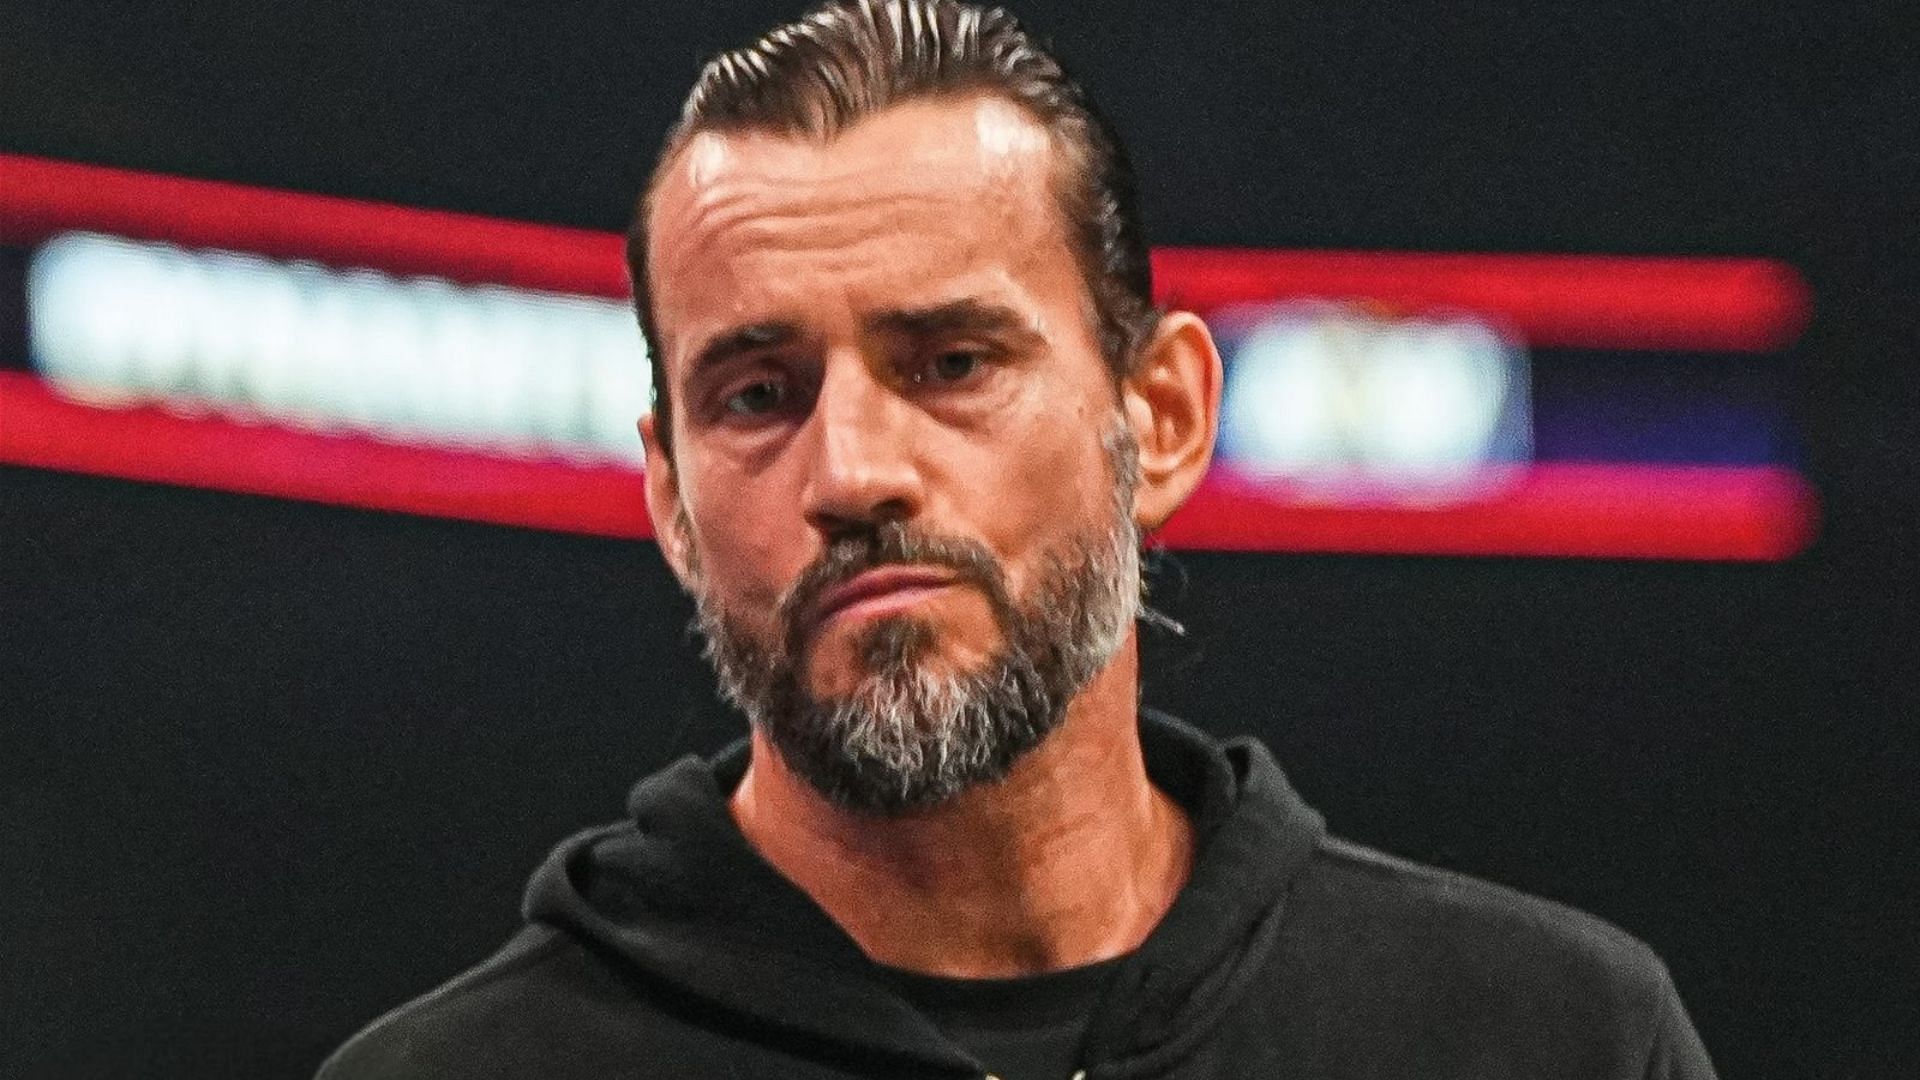 Could this be the loophole CM Punk needs in AEW?